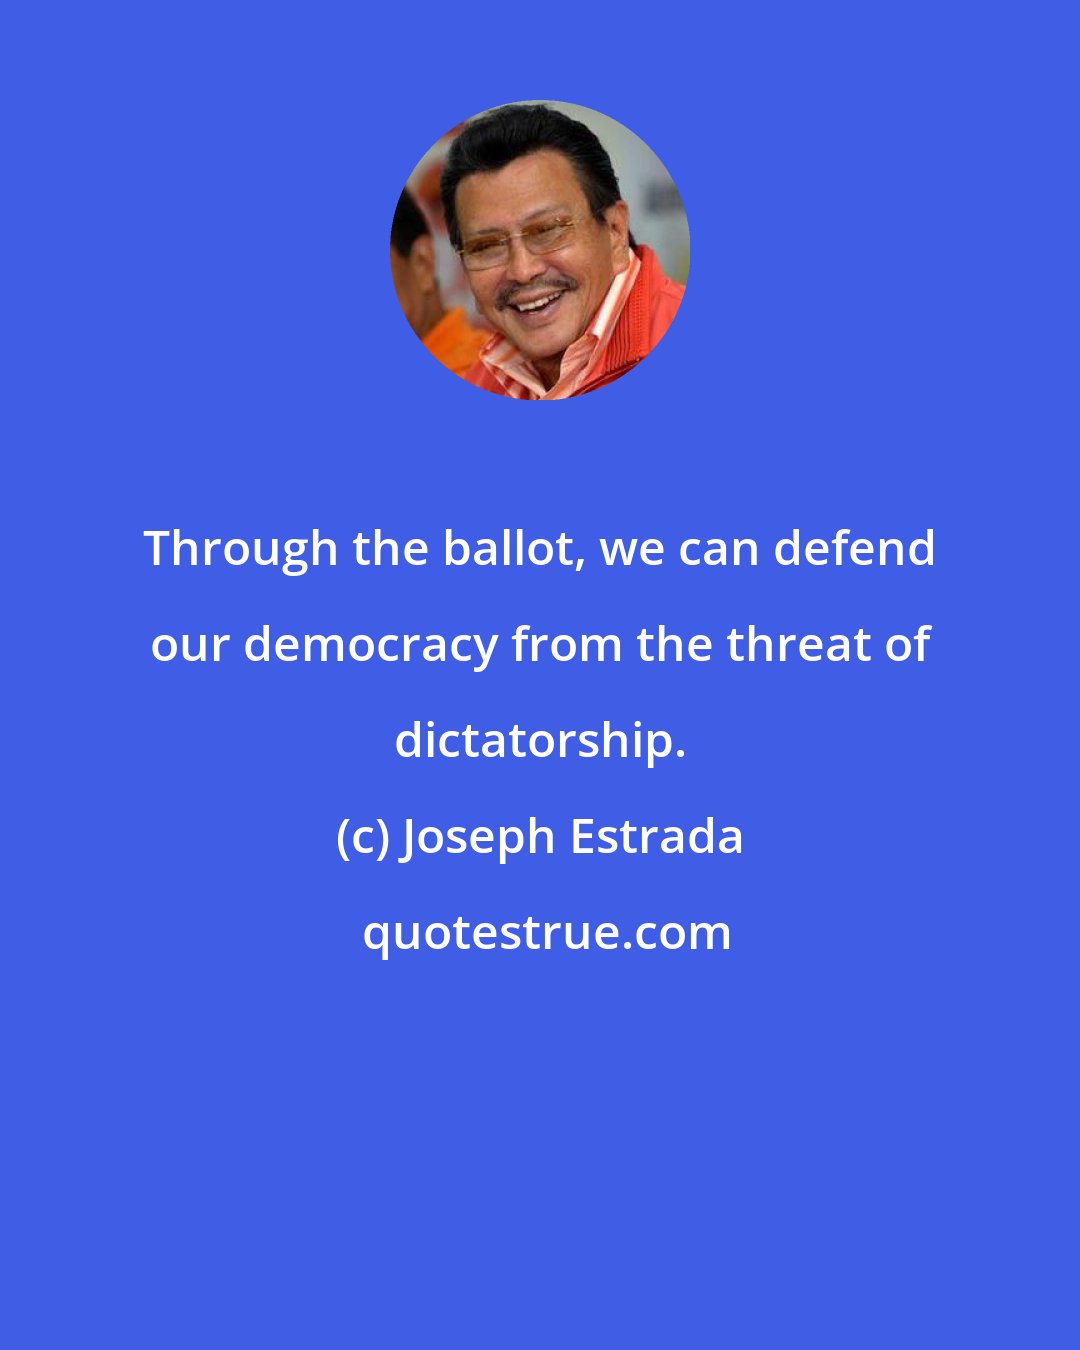 Joseph Estrada: Through the ballot, we can defend our democracy from the threat of dictatorship.